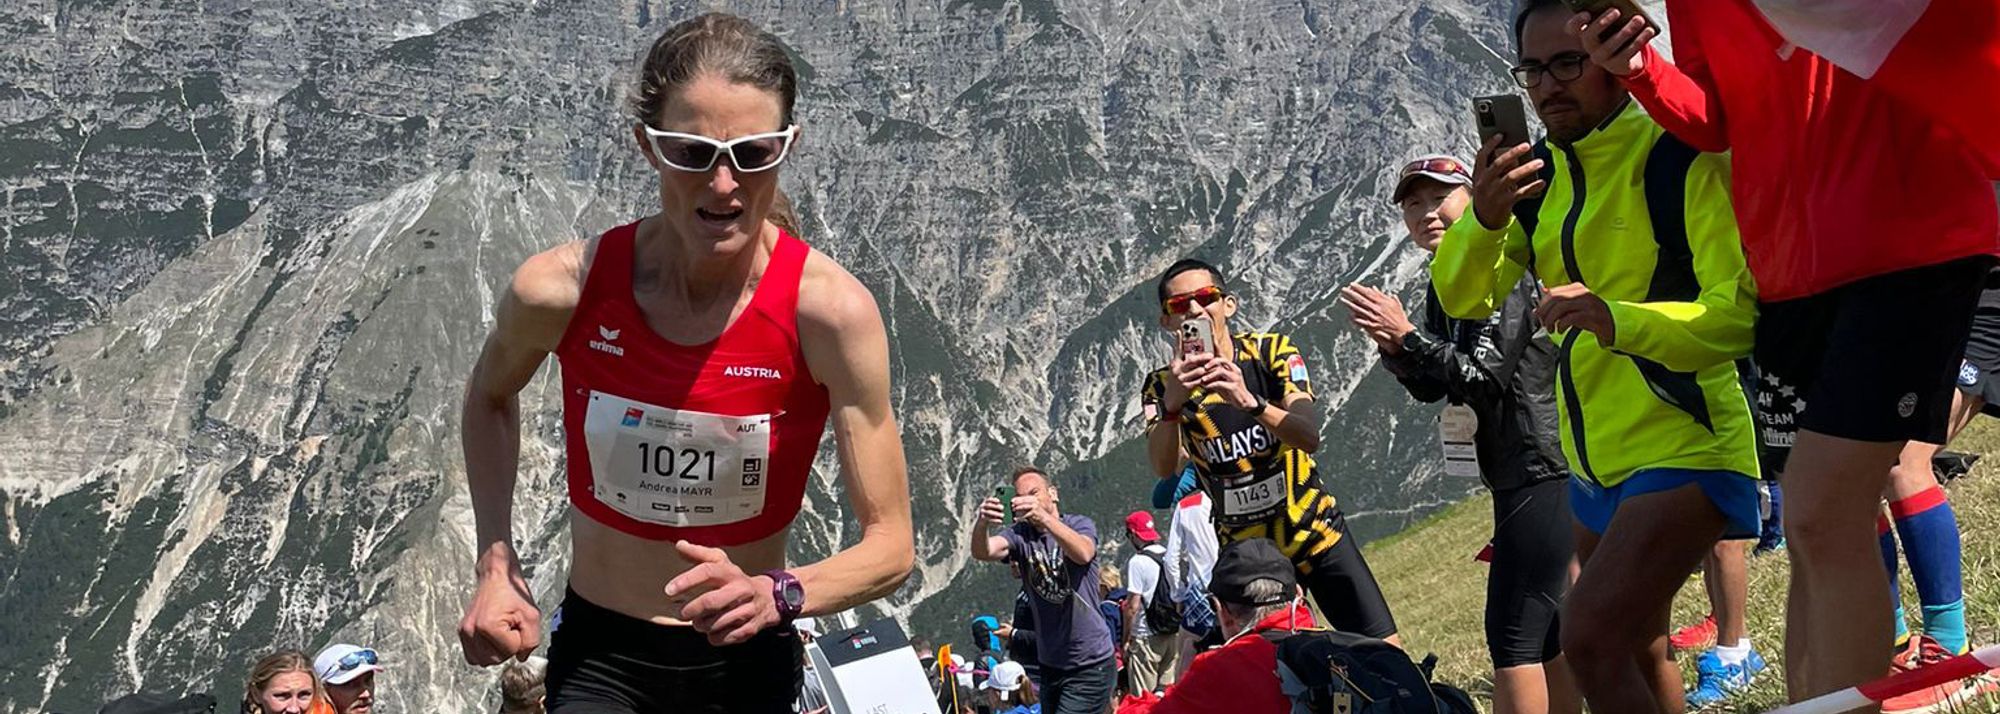 Austria’s Andrea Mayr and Kenya’s Patrick Kipngeno take gold in the vertical uphill events on day one of the World Mountain and Trail Running Championships